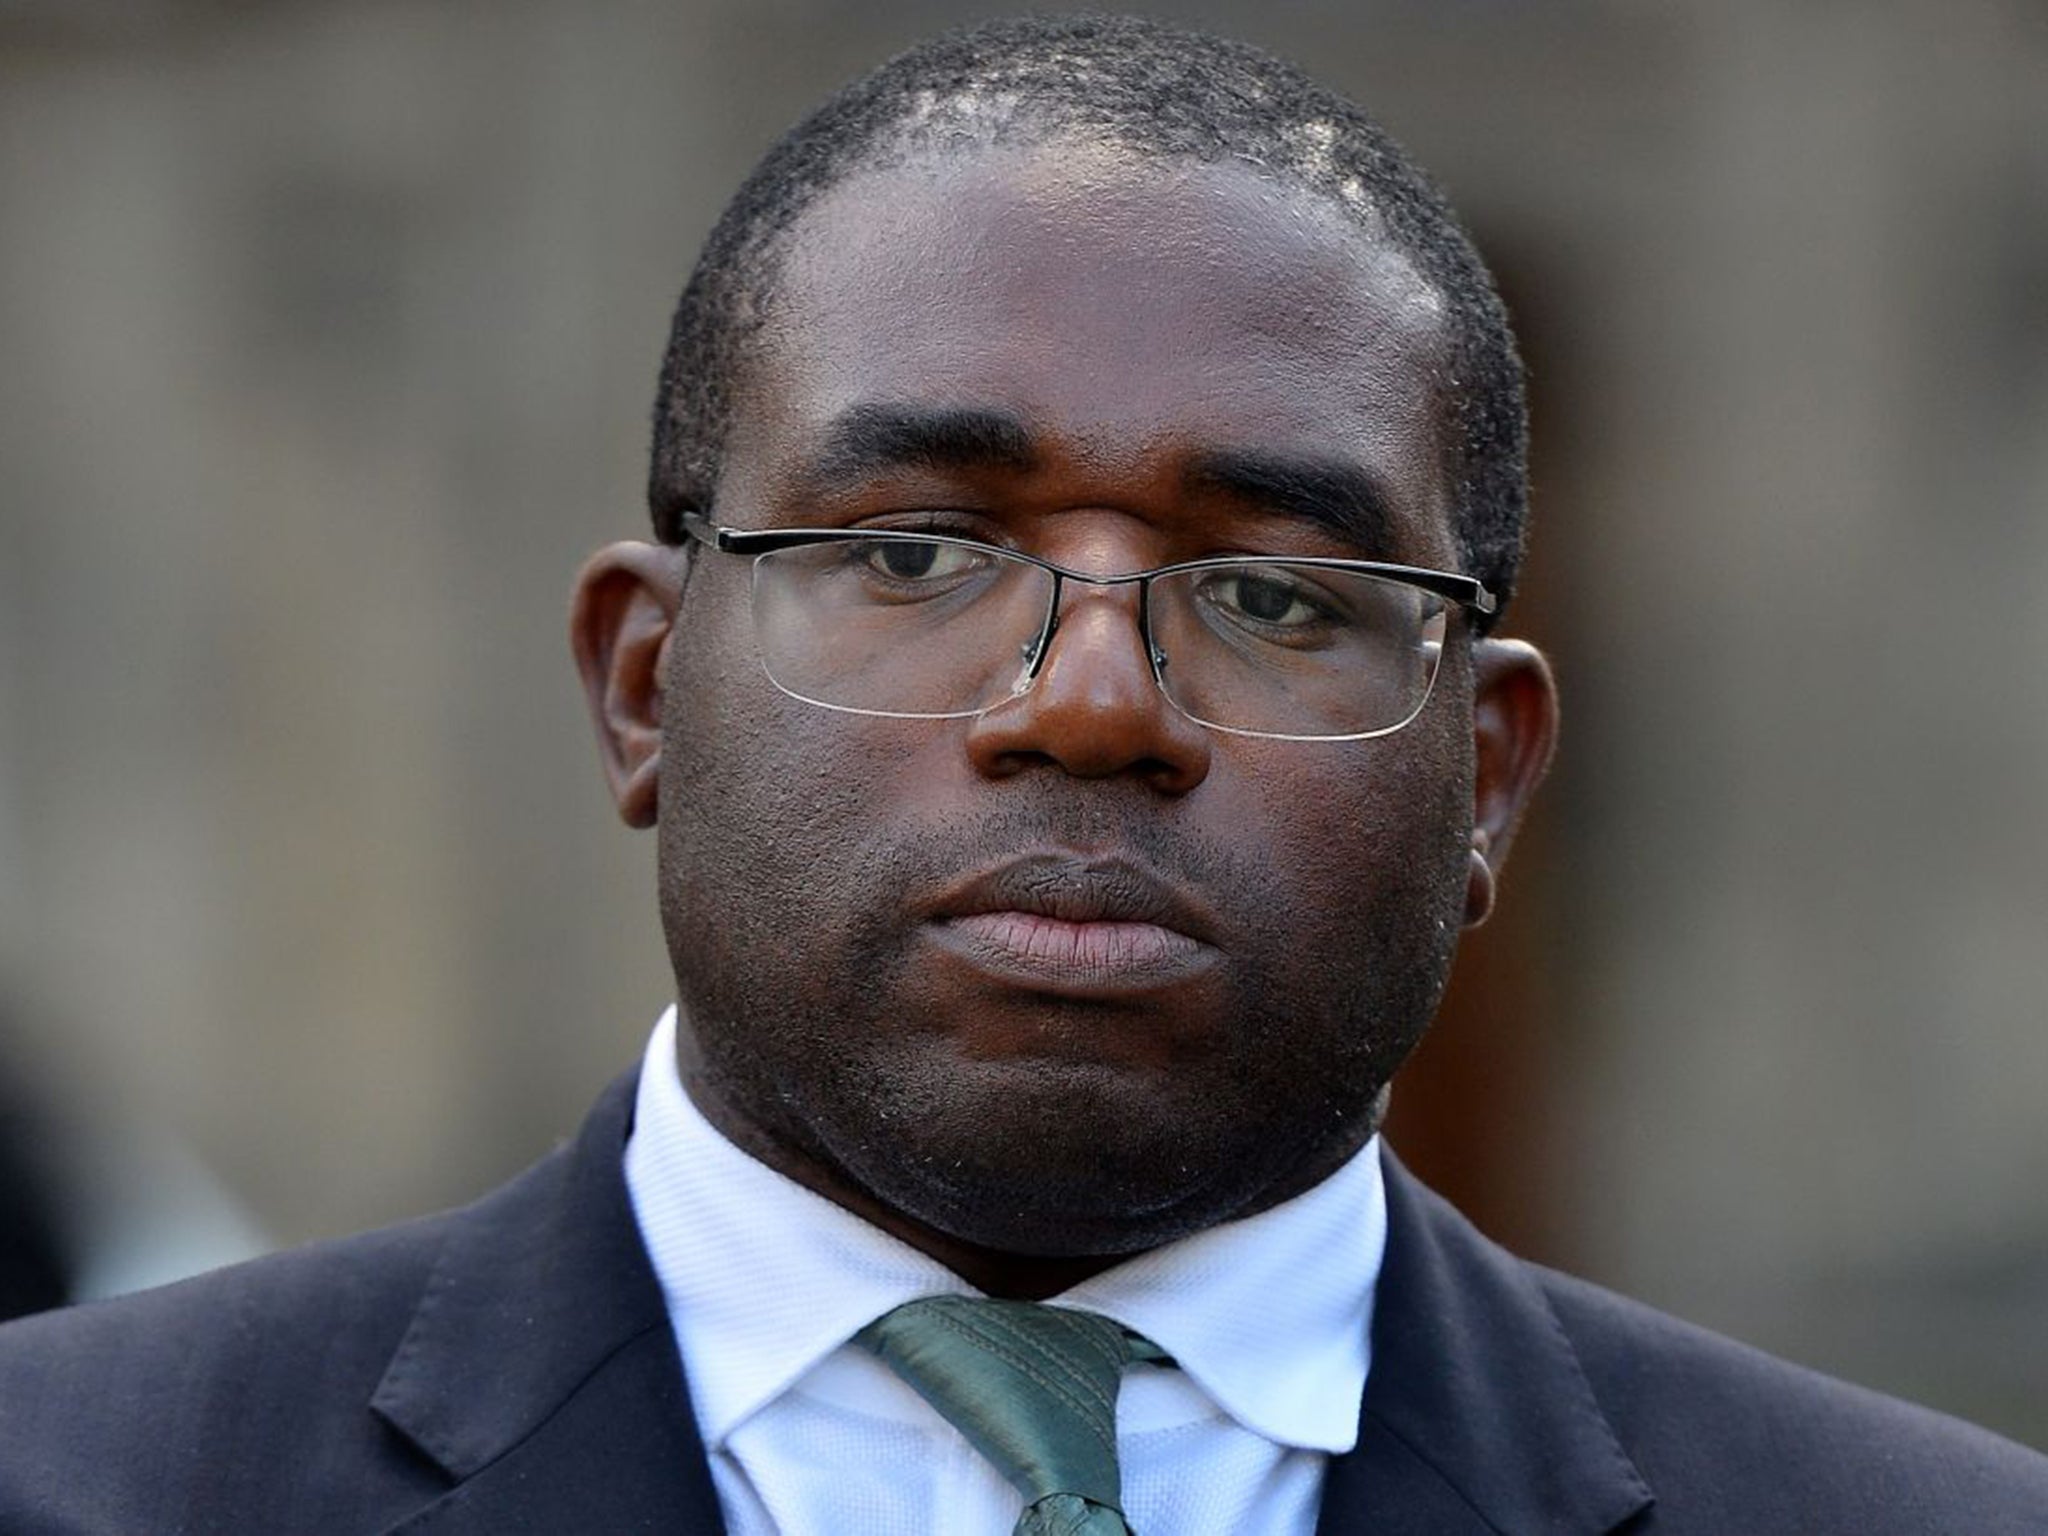 David Lammy called for Parliament to vote against Brexit